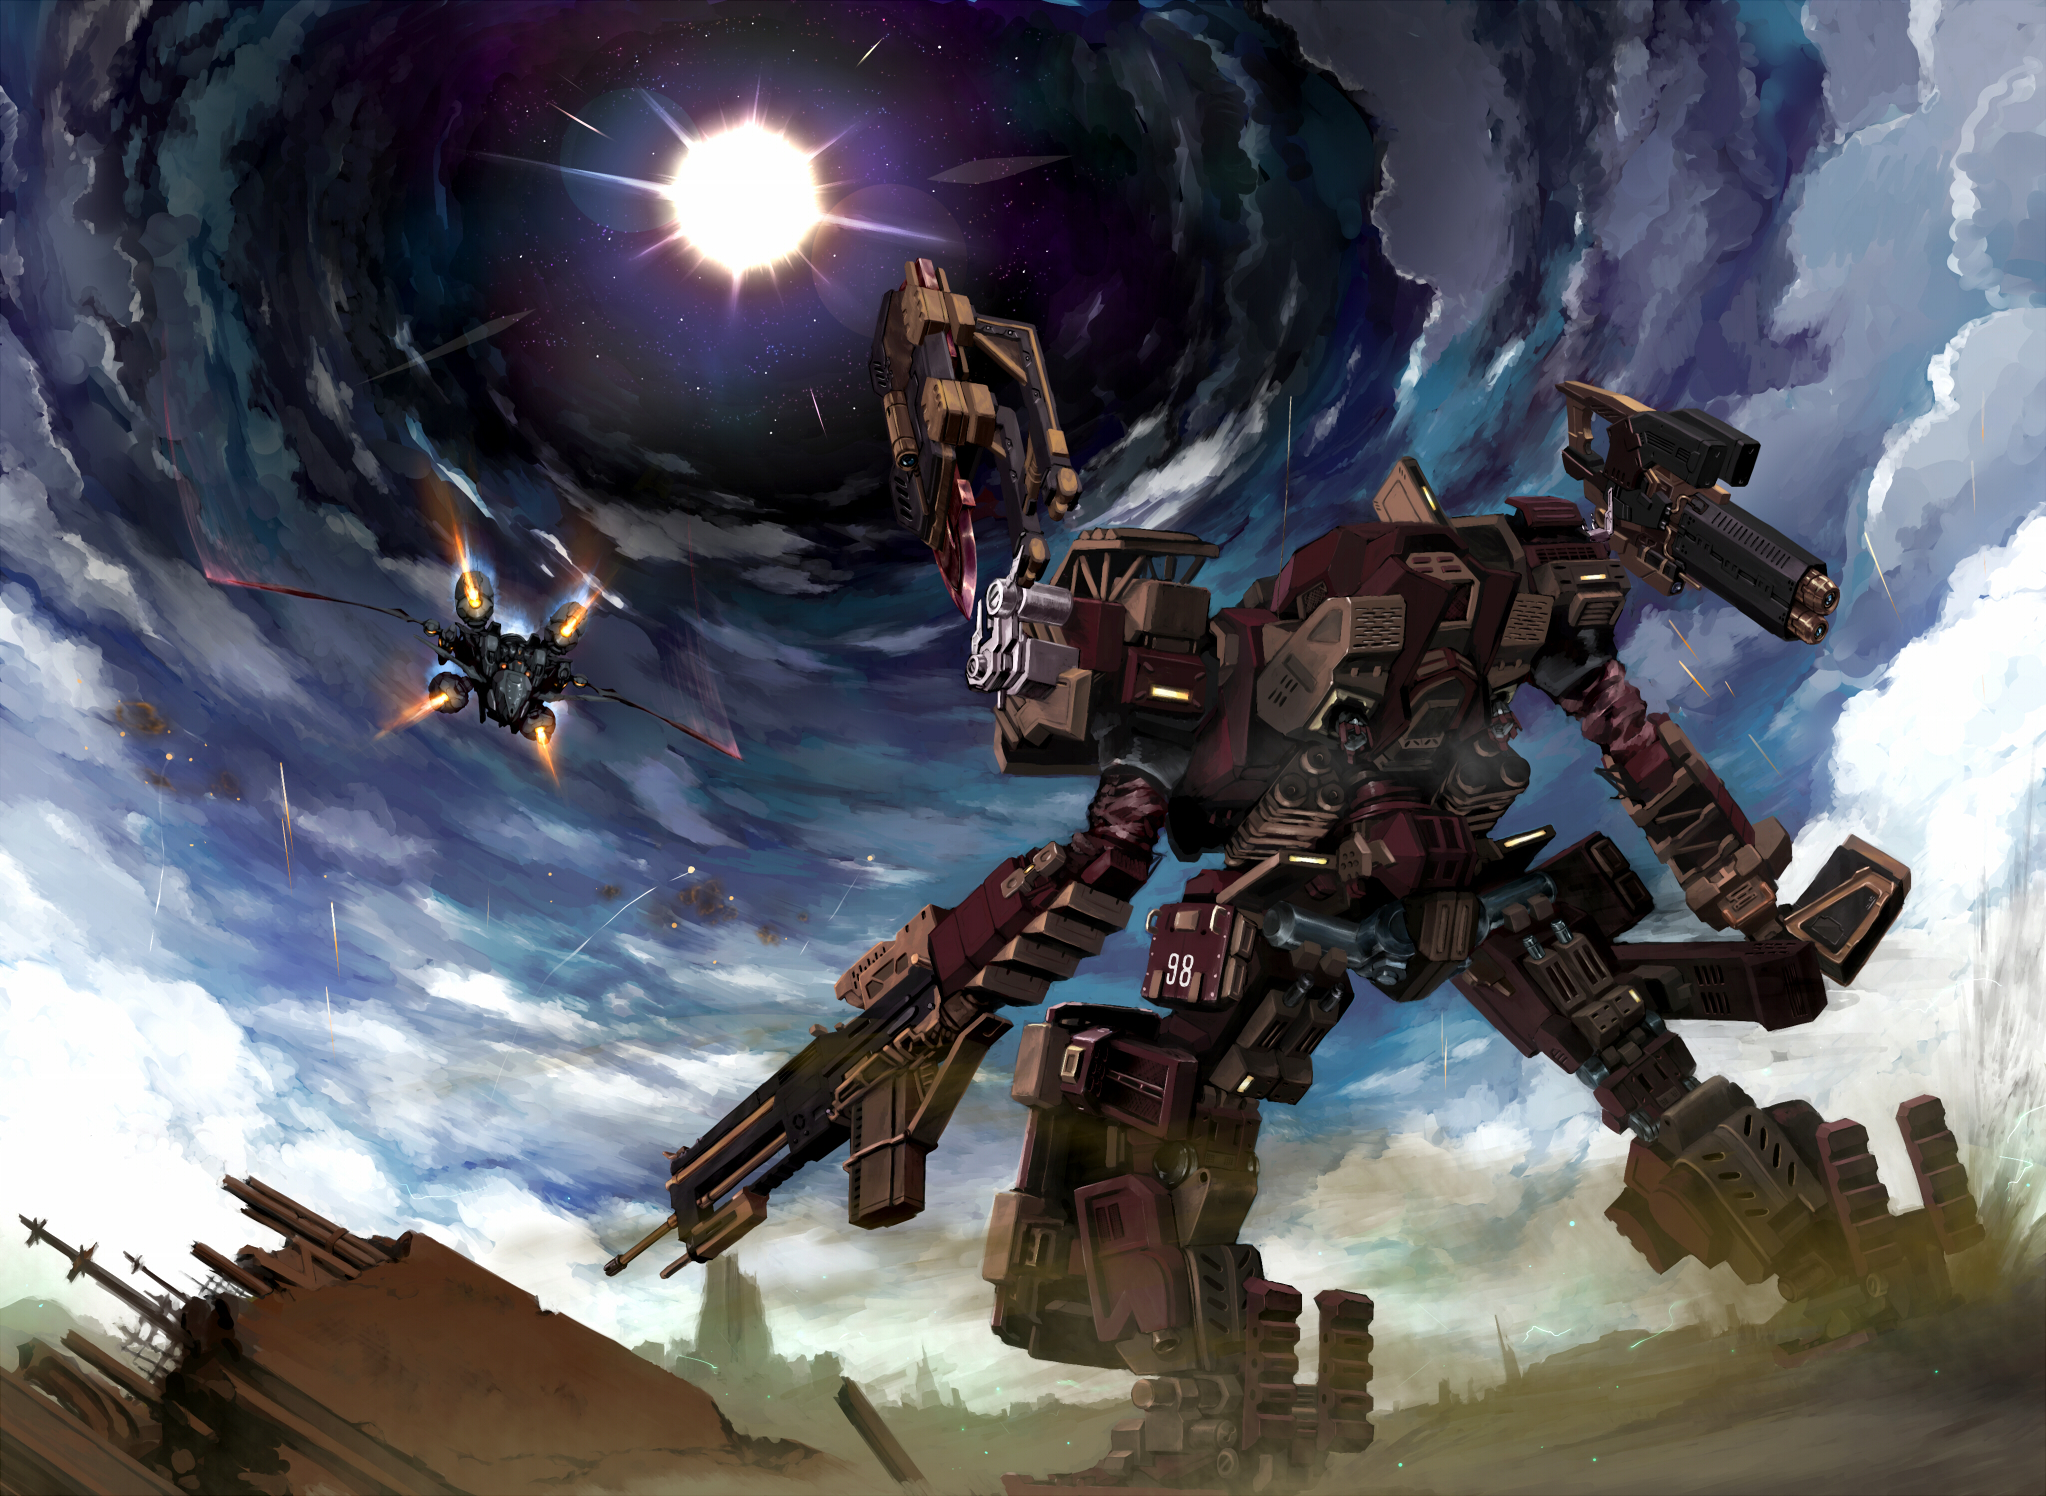 Armored Core 5: Verdict Day, Black Glint by GENC on Newgrounds